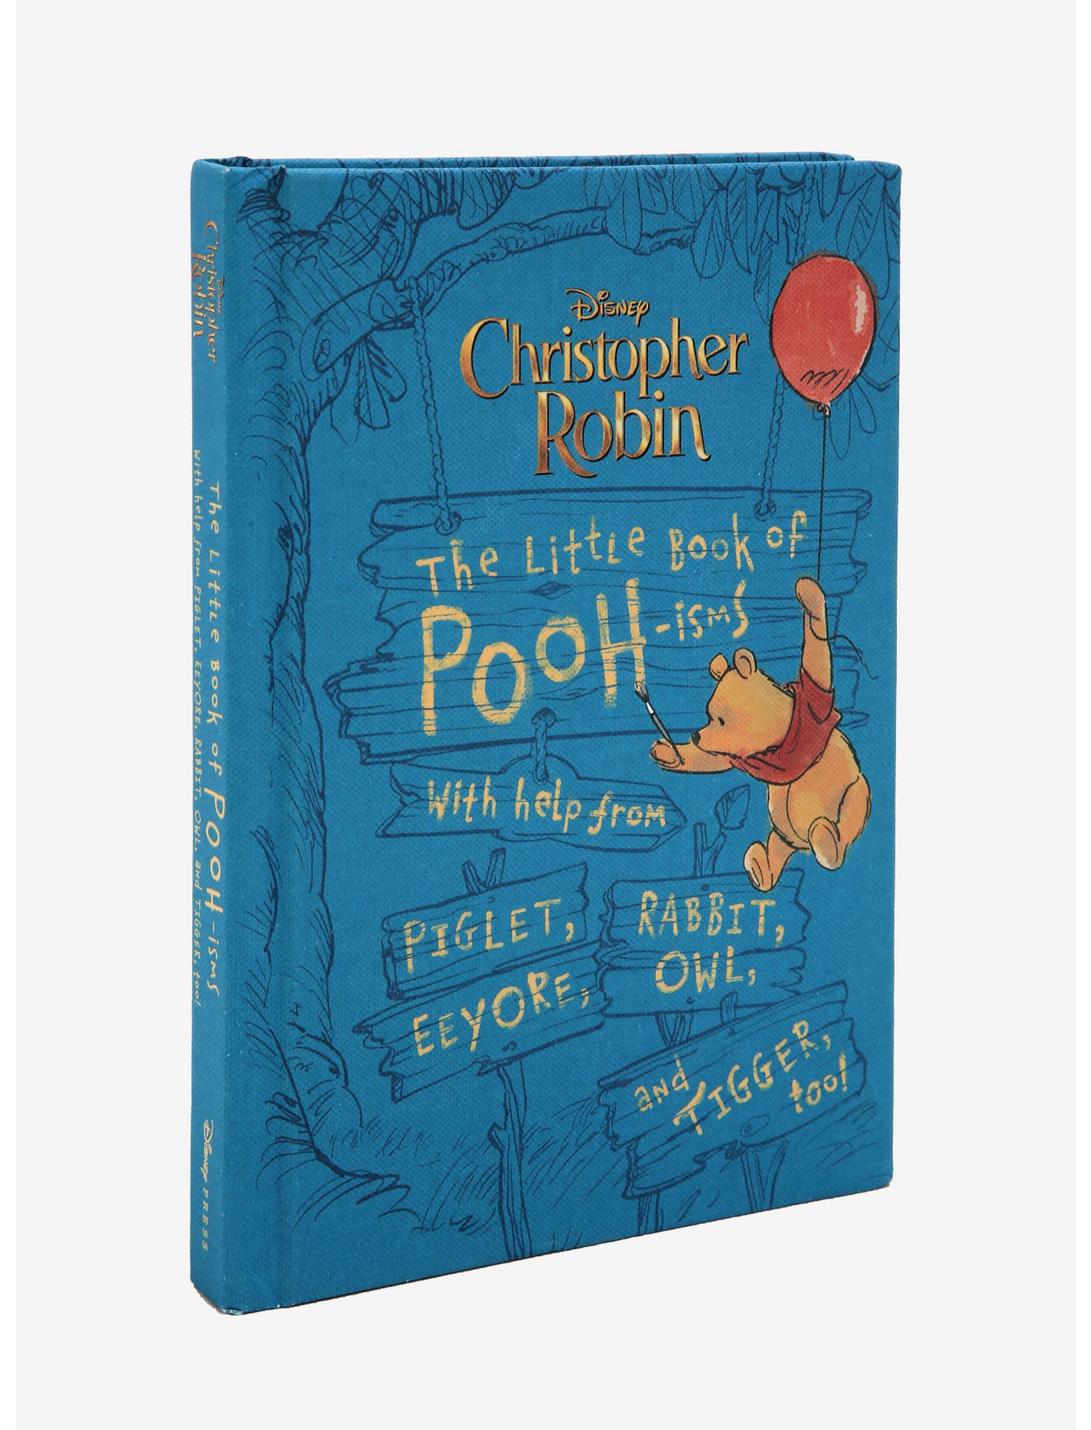 Disney Christopher Robin The Little Book of Pooh-isms, , hi-res